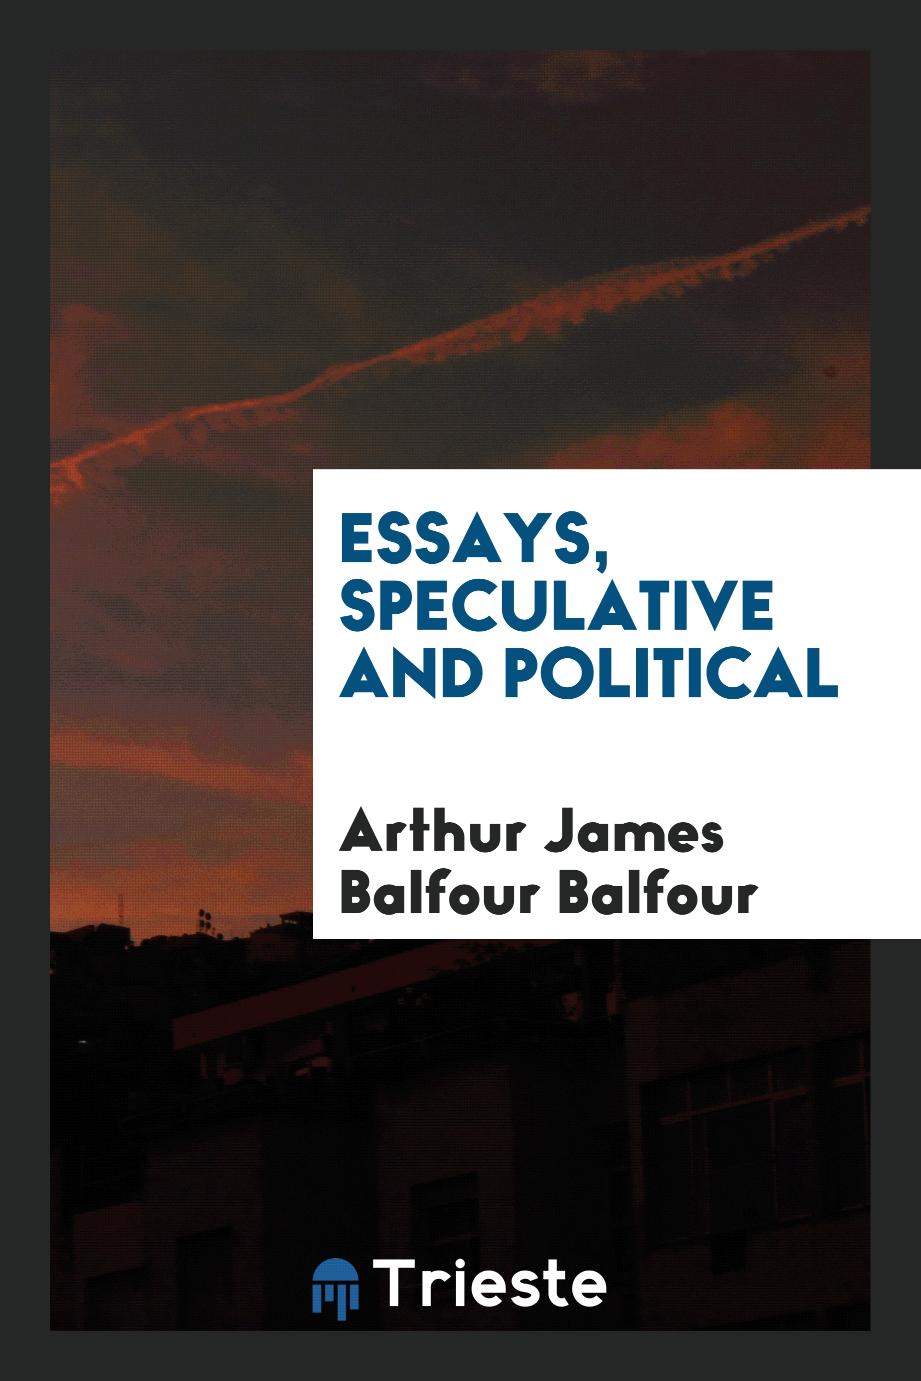 Essays, speculative and political